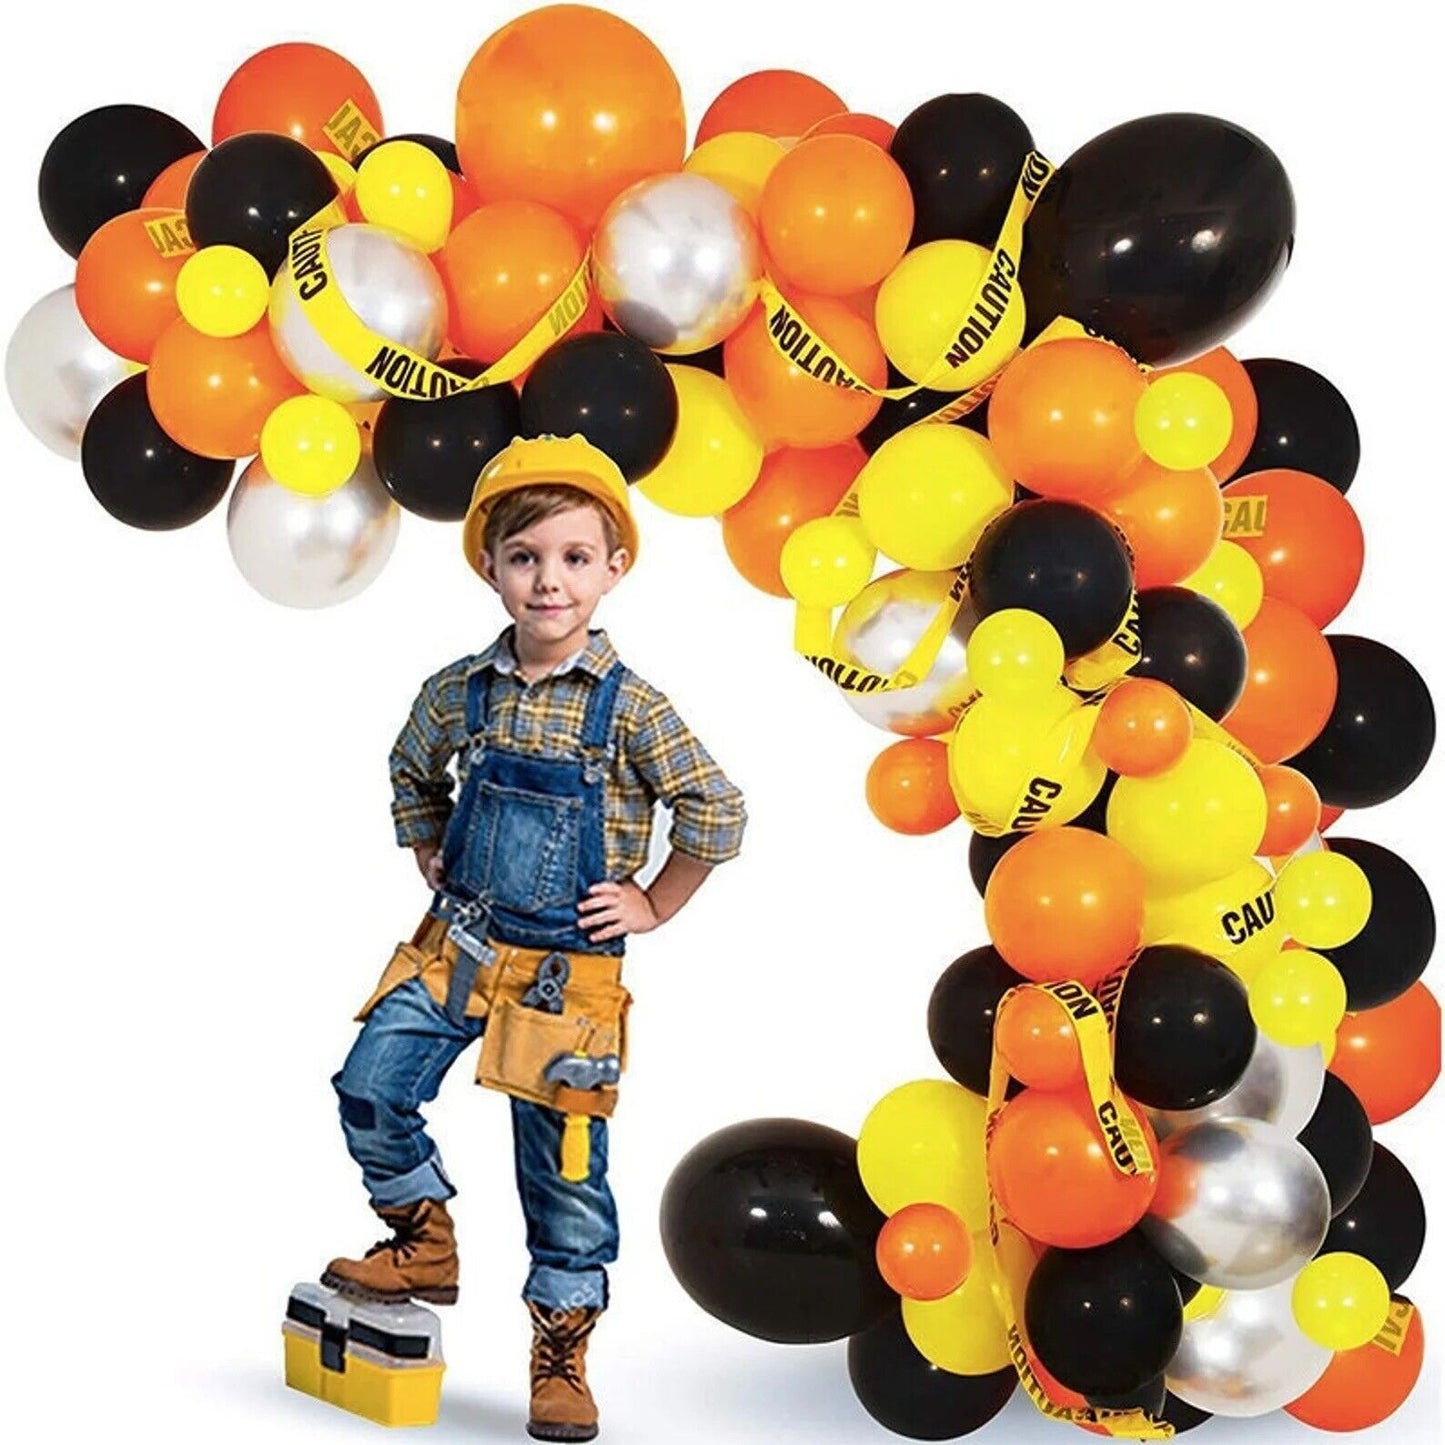 Construction Theme Balloon Arch Kit with Caution Tapes